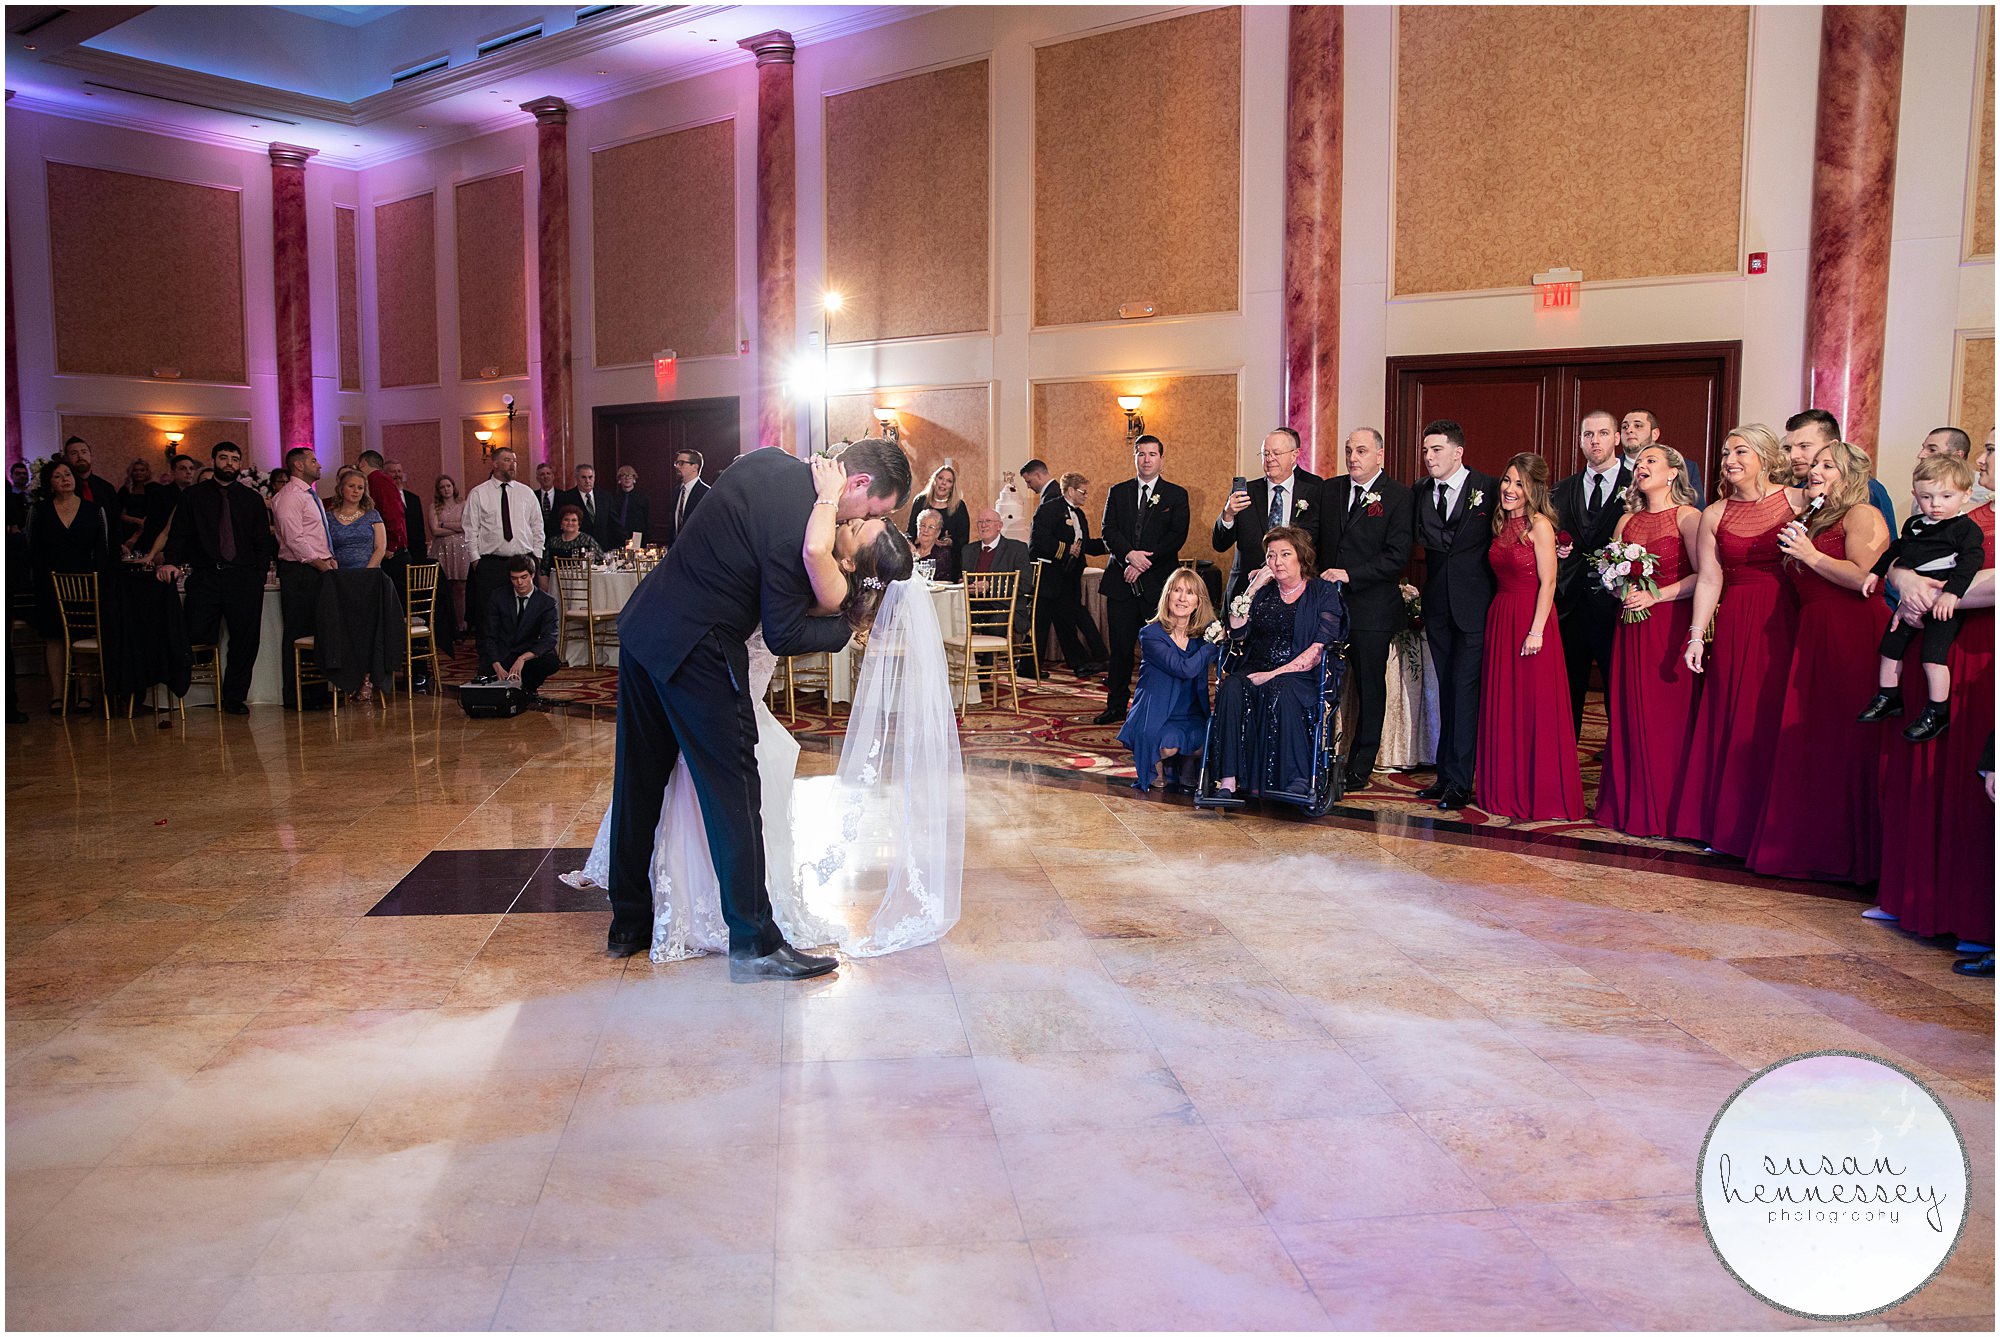 First dance for bride and groom at the Merion wedding reception